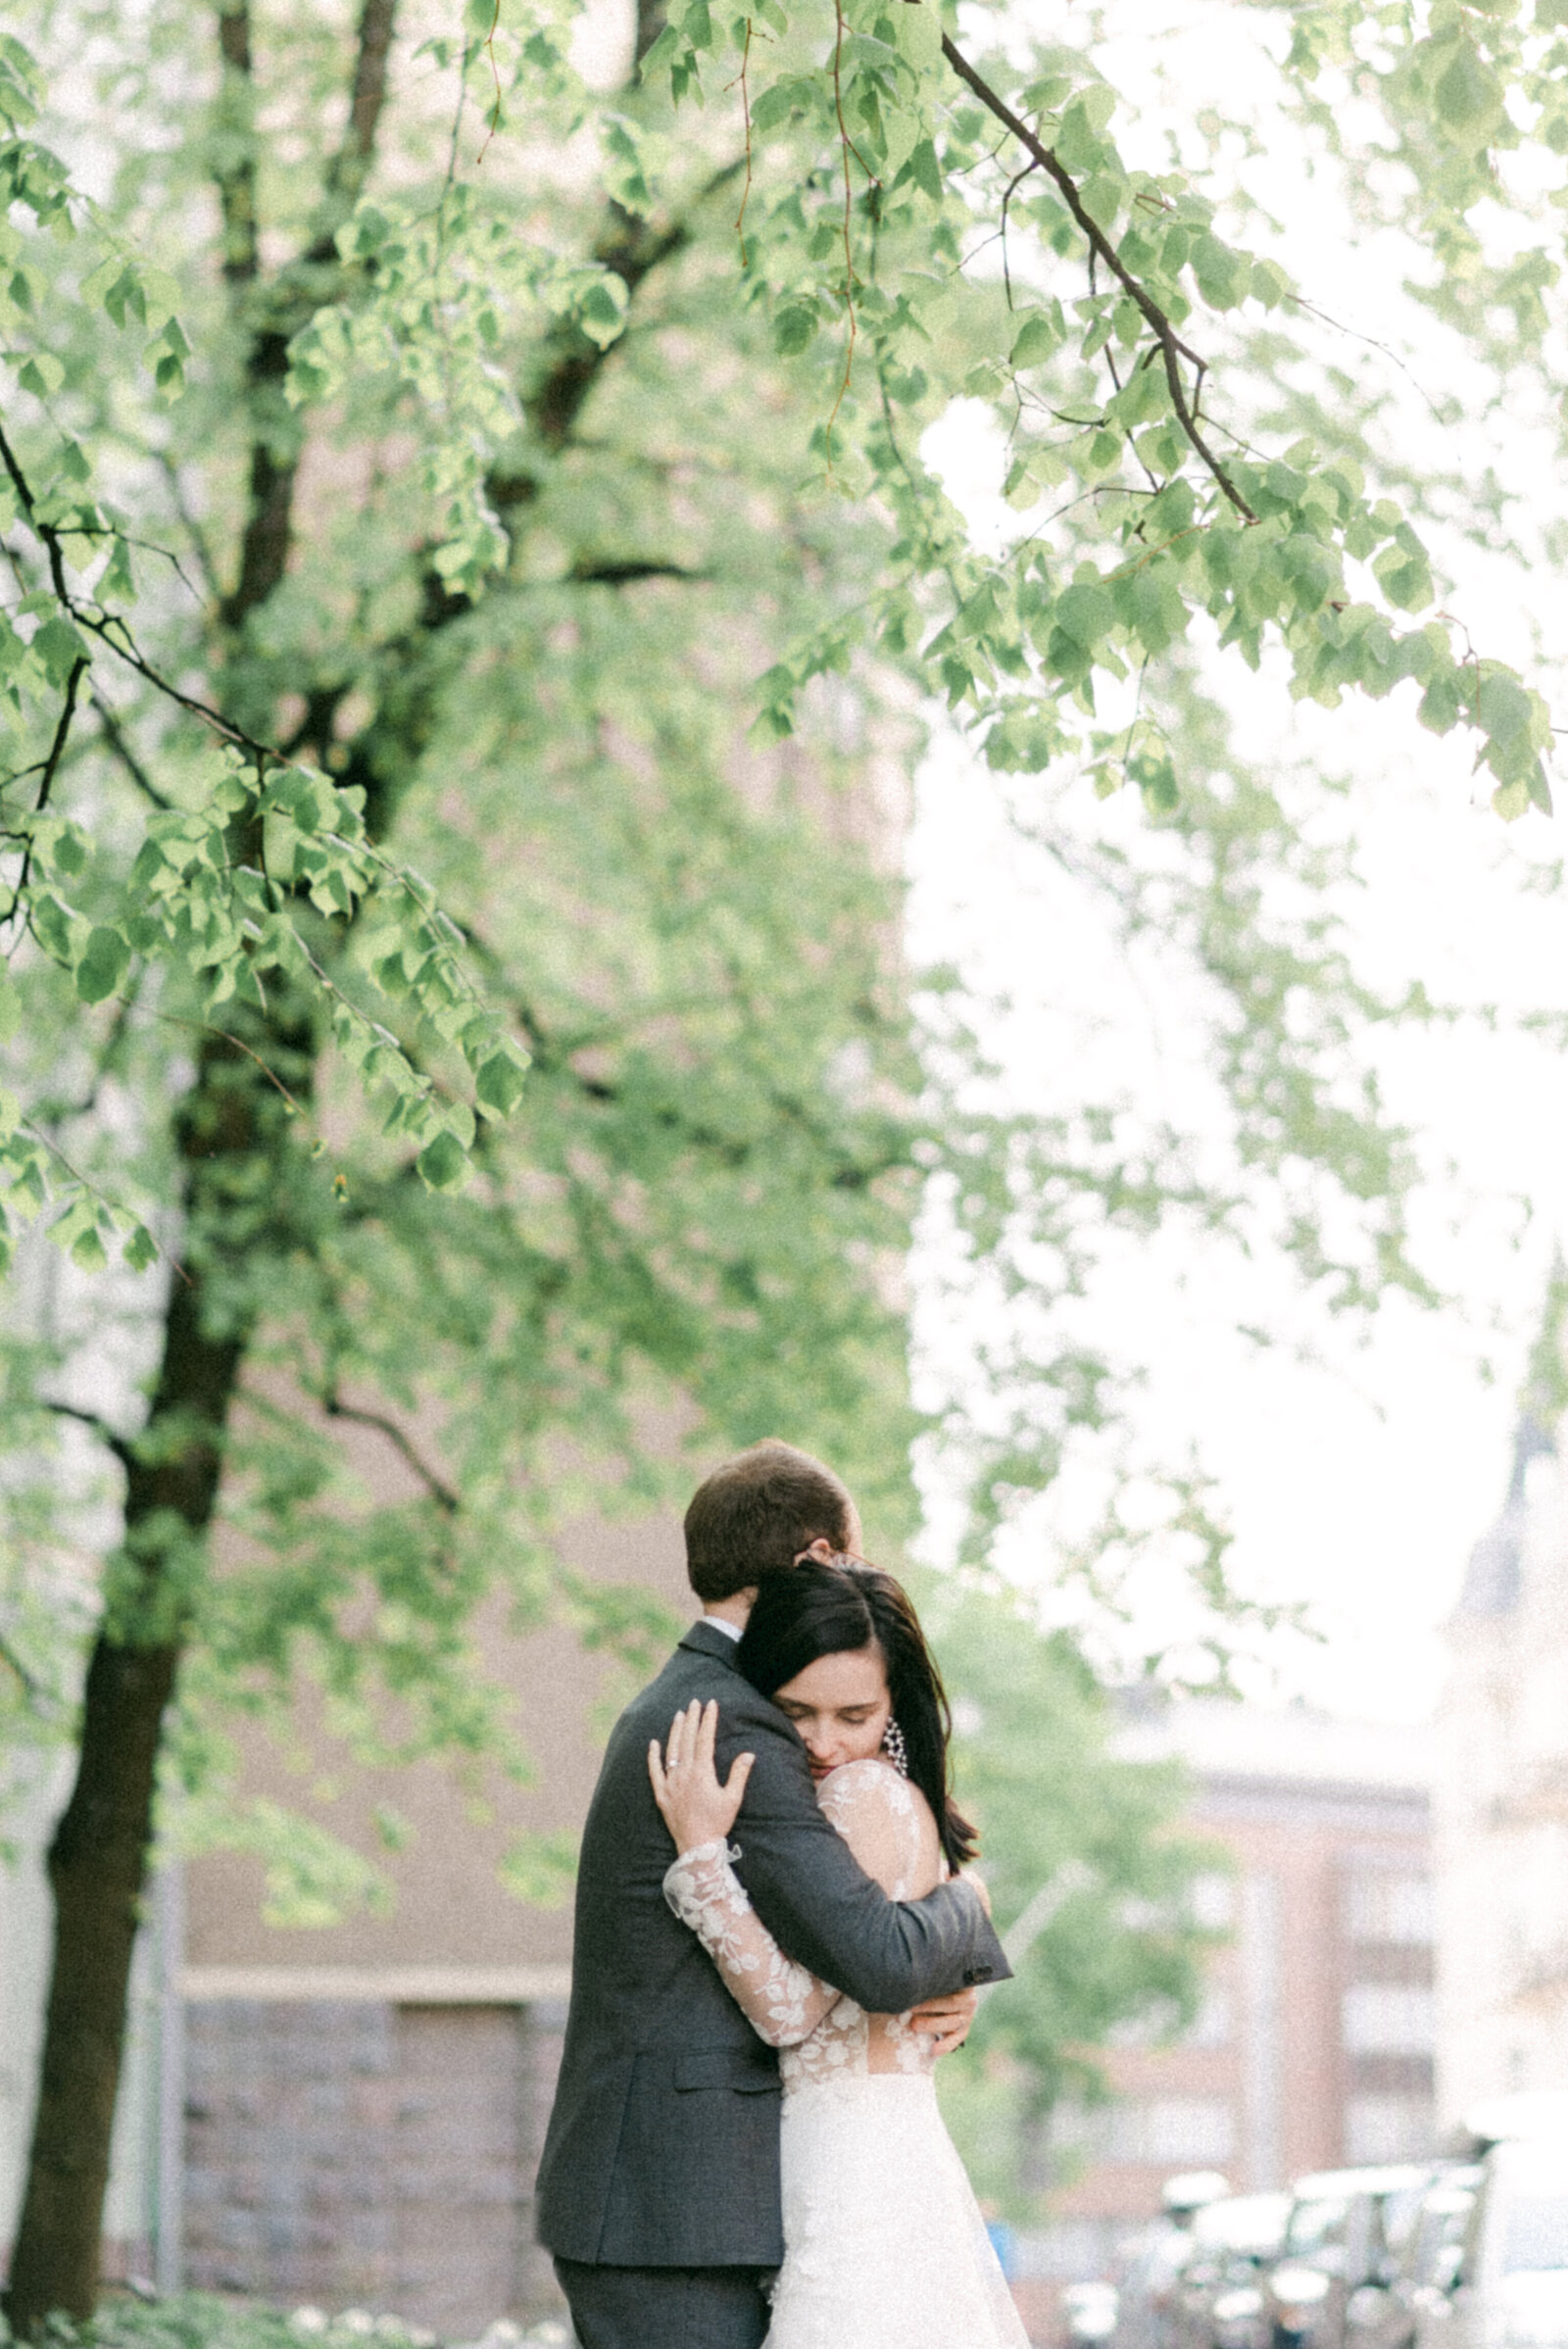 Emotional wedding photograph of a couple hugging on the street in Helsinki. Spring wedding image photographed by wedding photographer Hannika Gabrielsson in Finland.